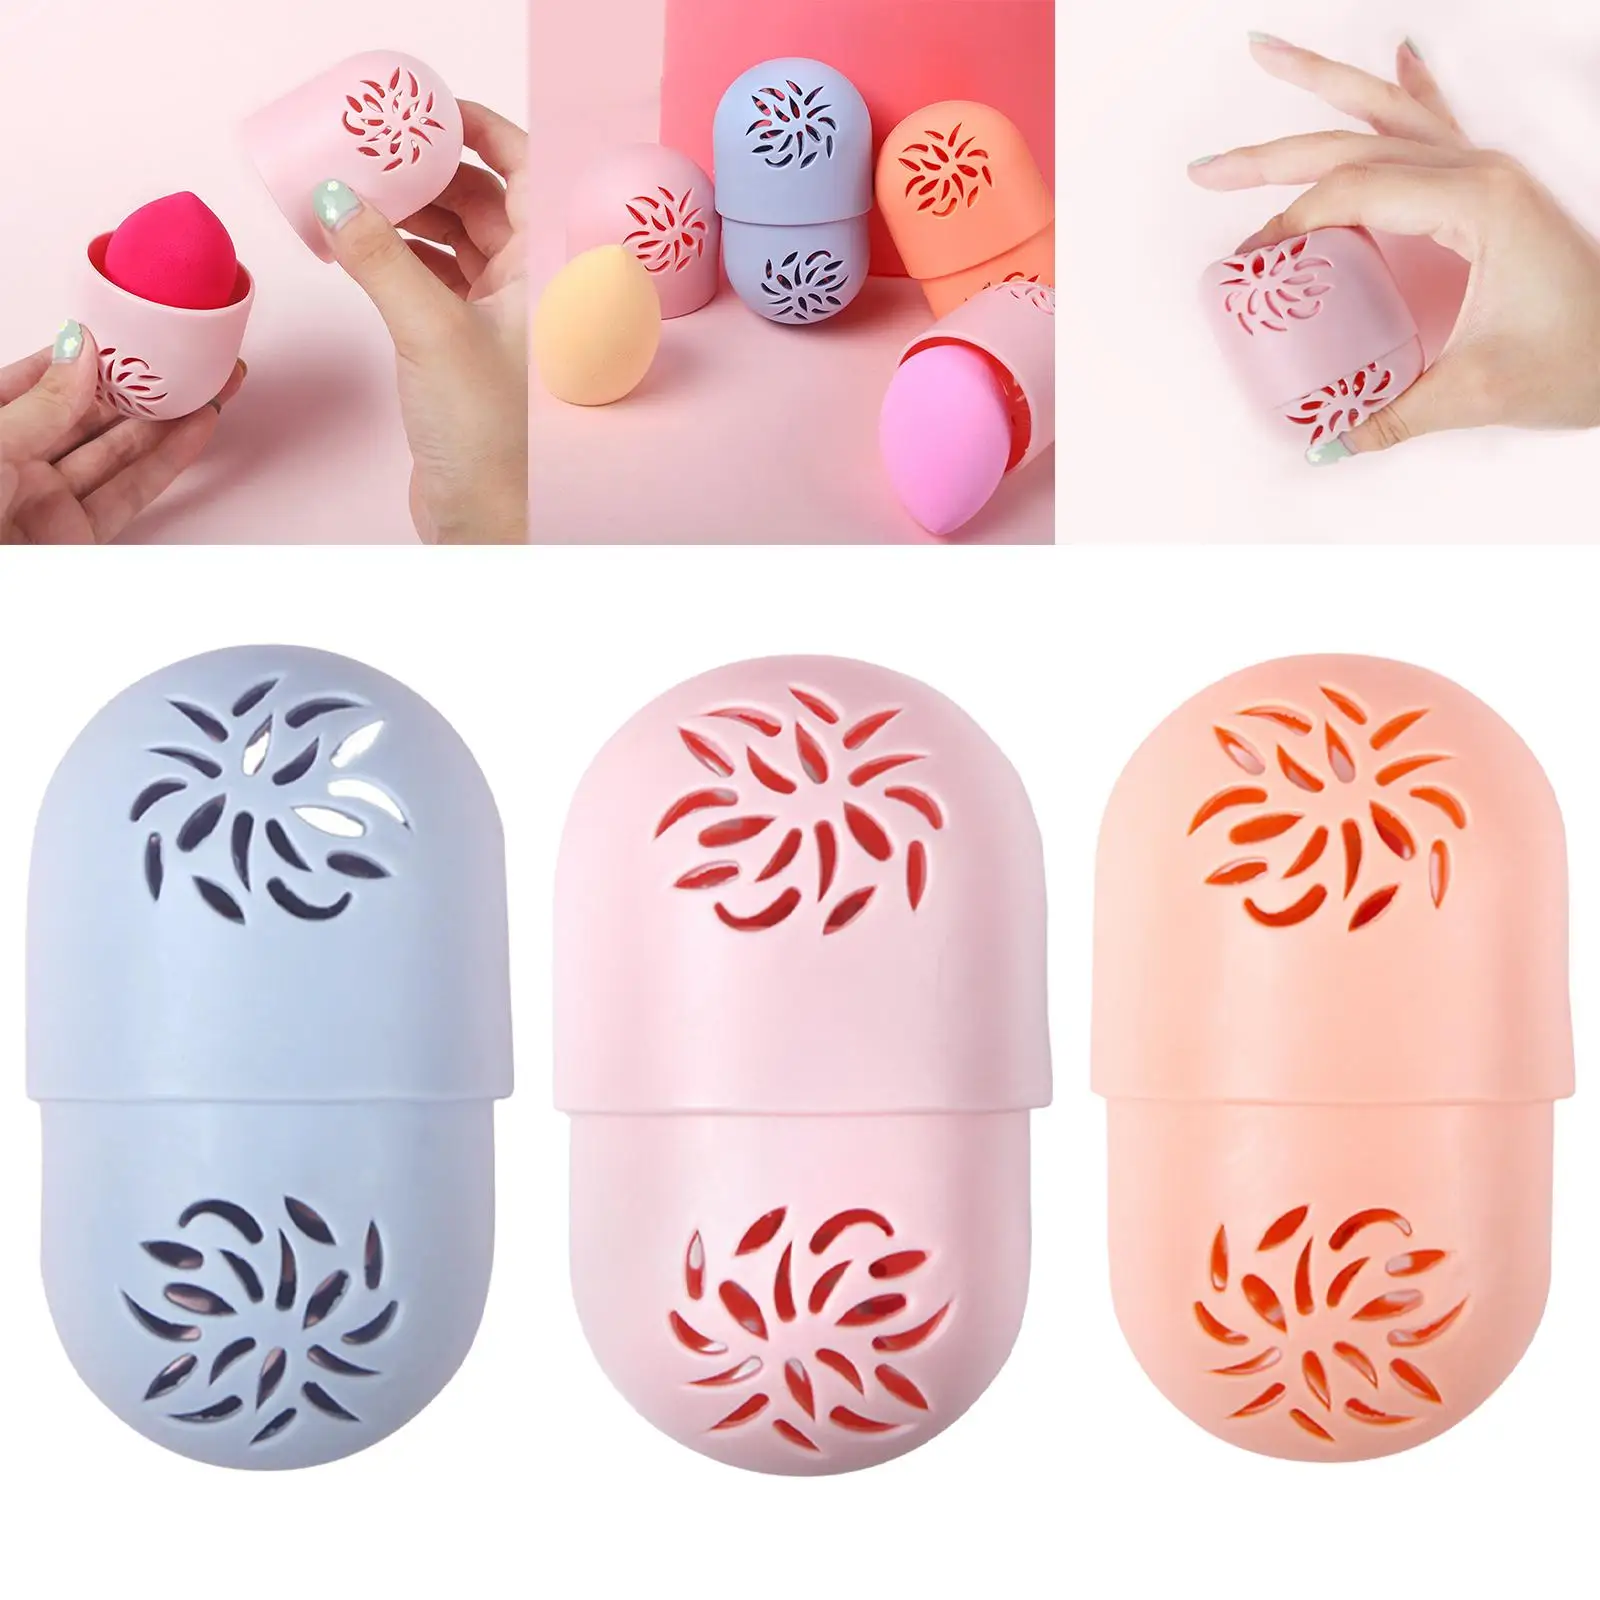 Silicone Beauty Sponge Storage Box Cosmetic Puff Case Portable Makeup Sponge Storage for Travel Container Egg Sponge Stand